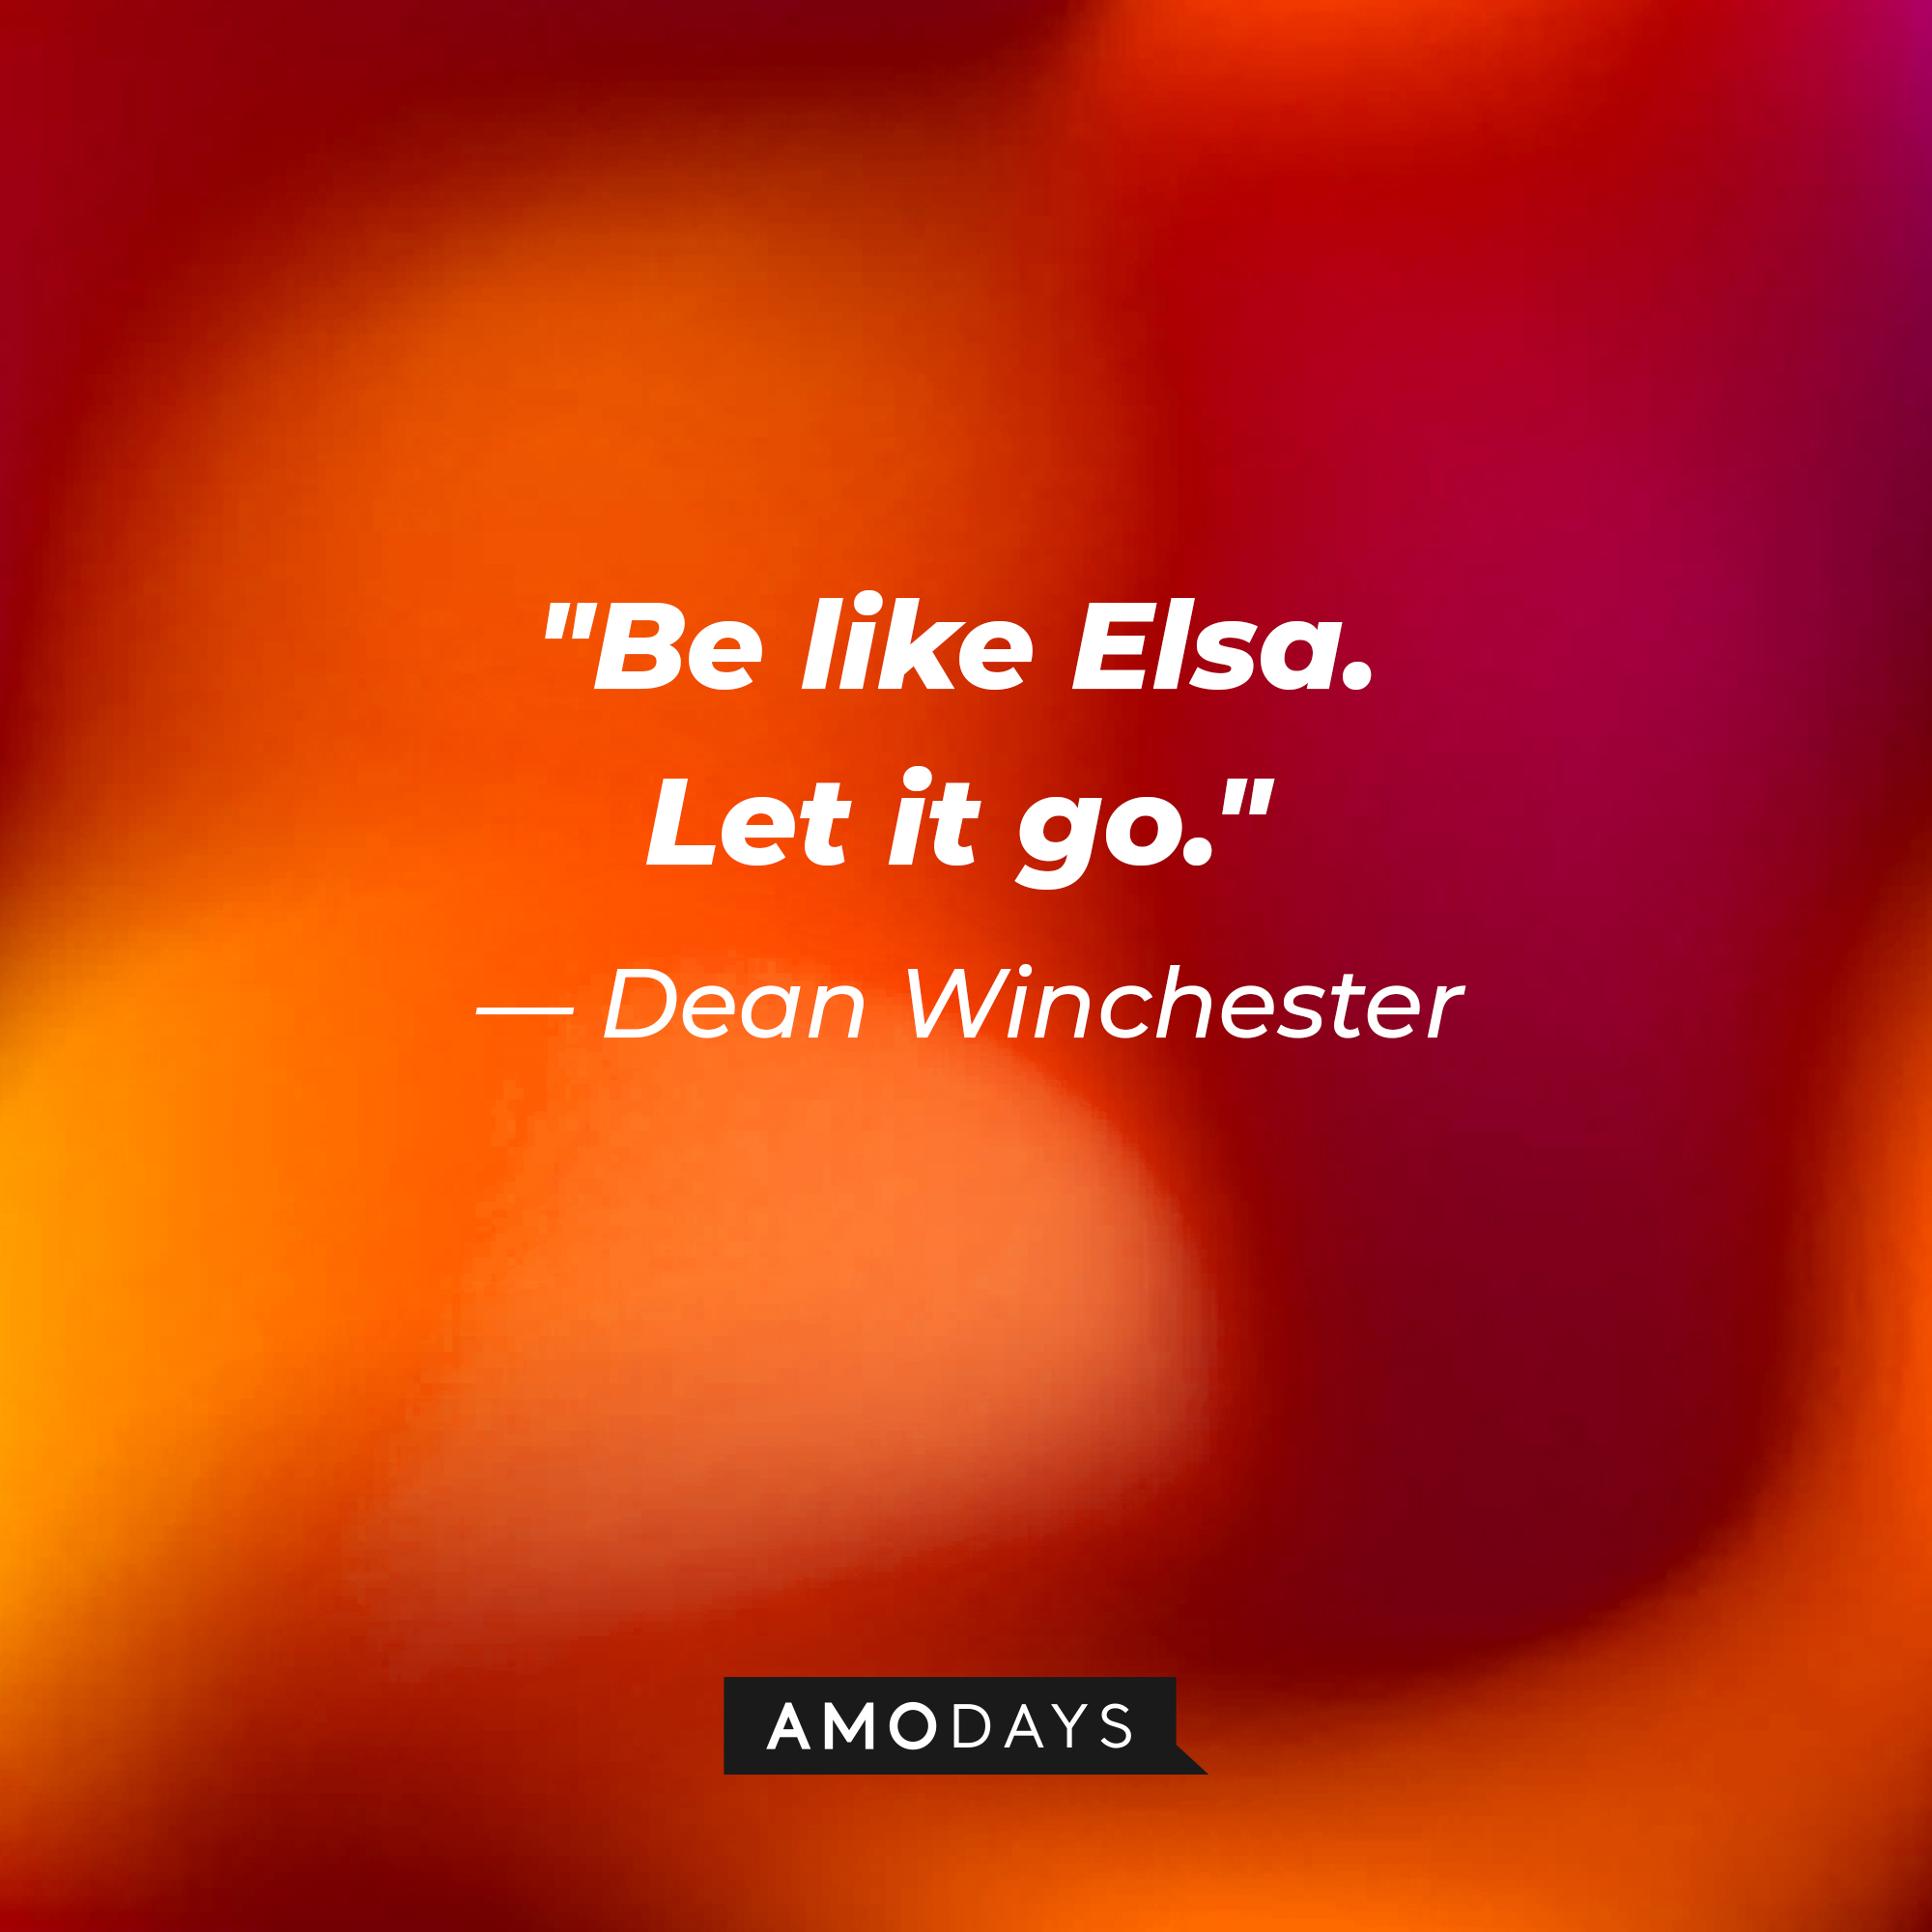 Dean Winchester's quote, "Be like Elsa. Let it go." | Source: Amodays